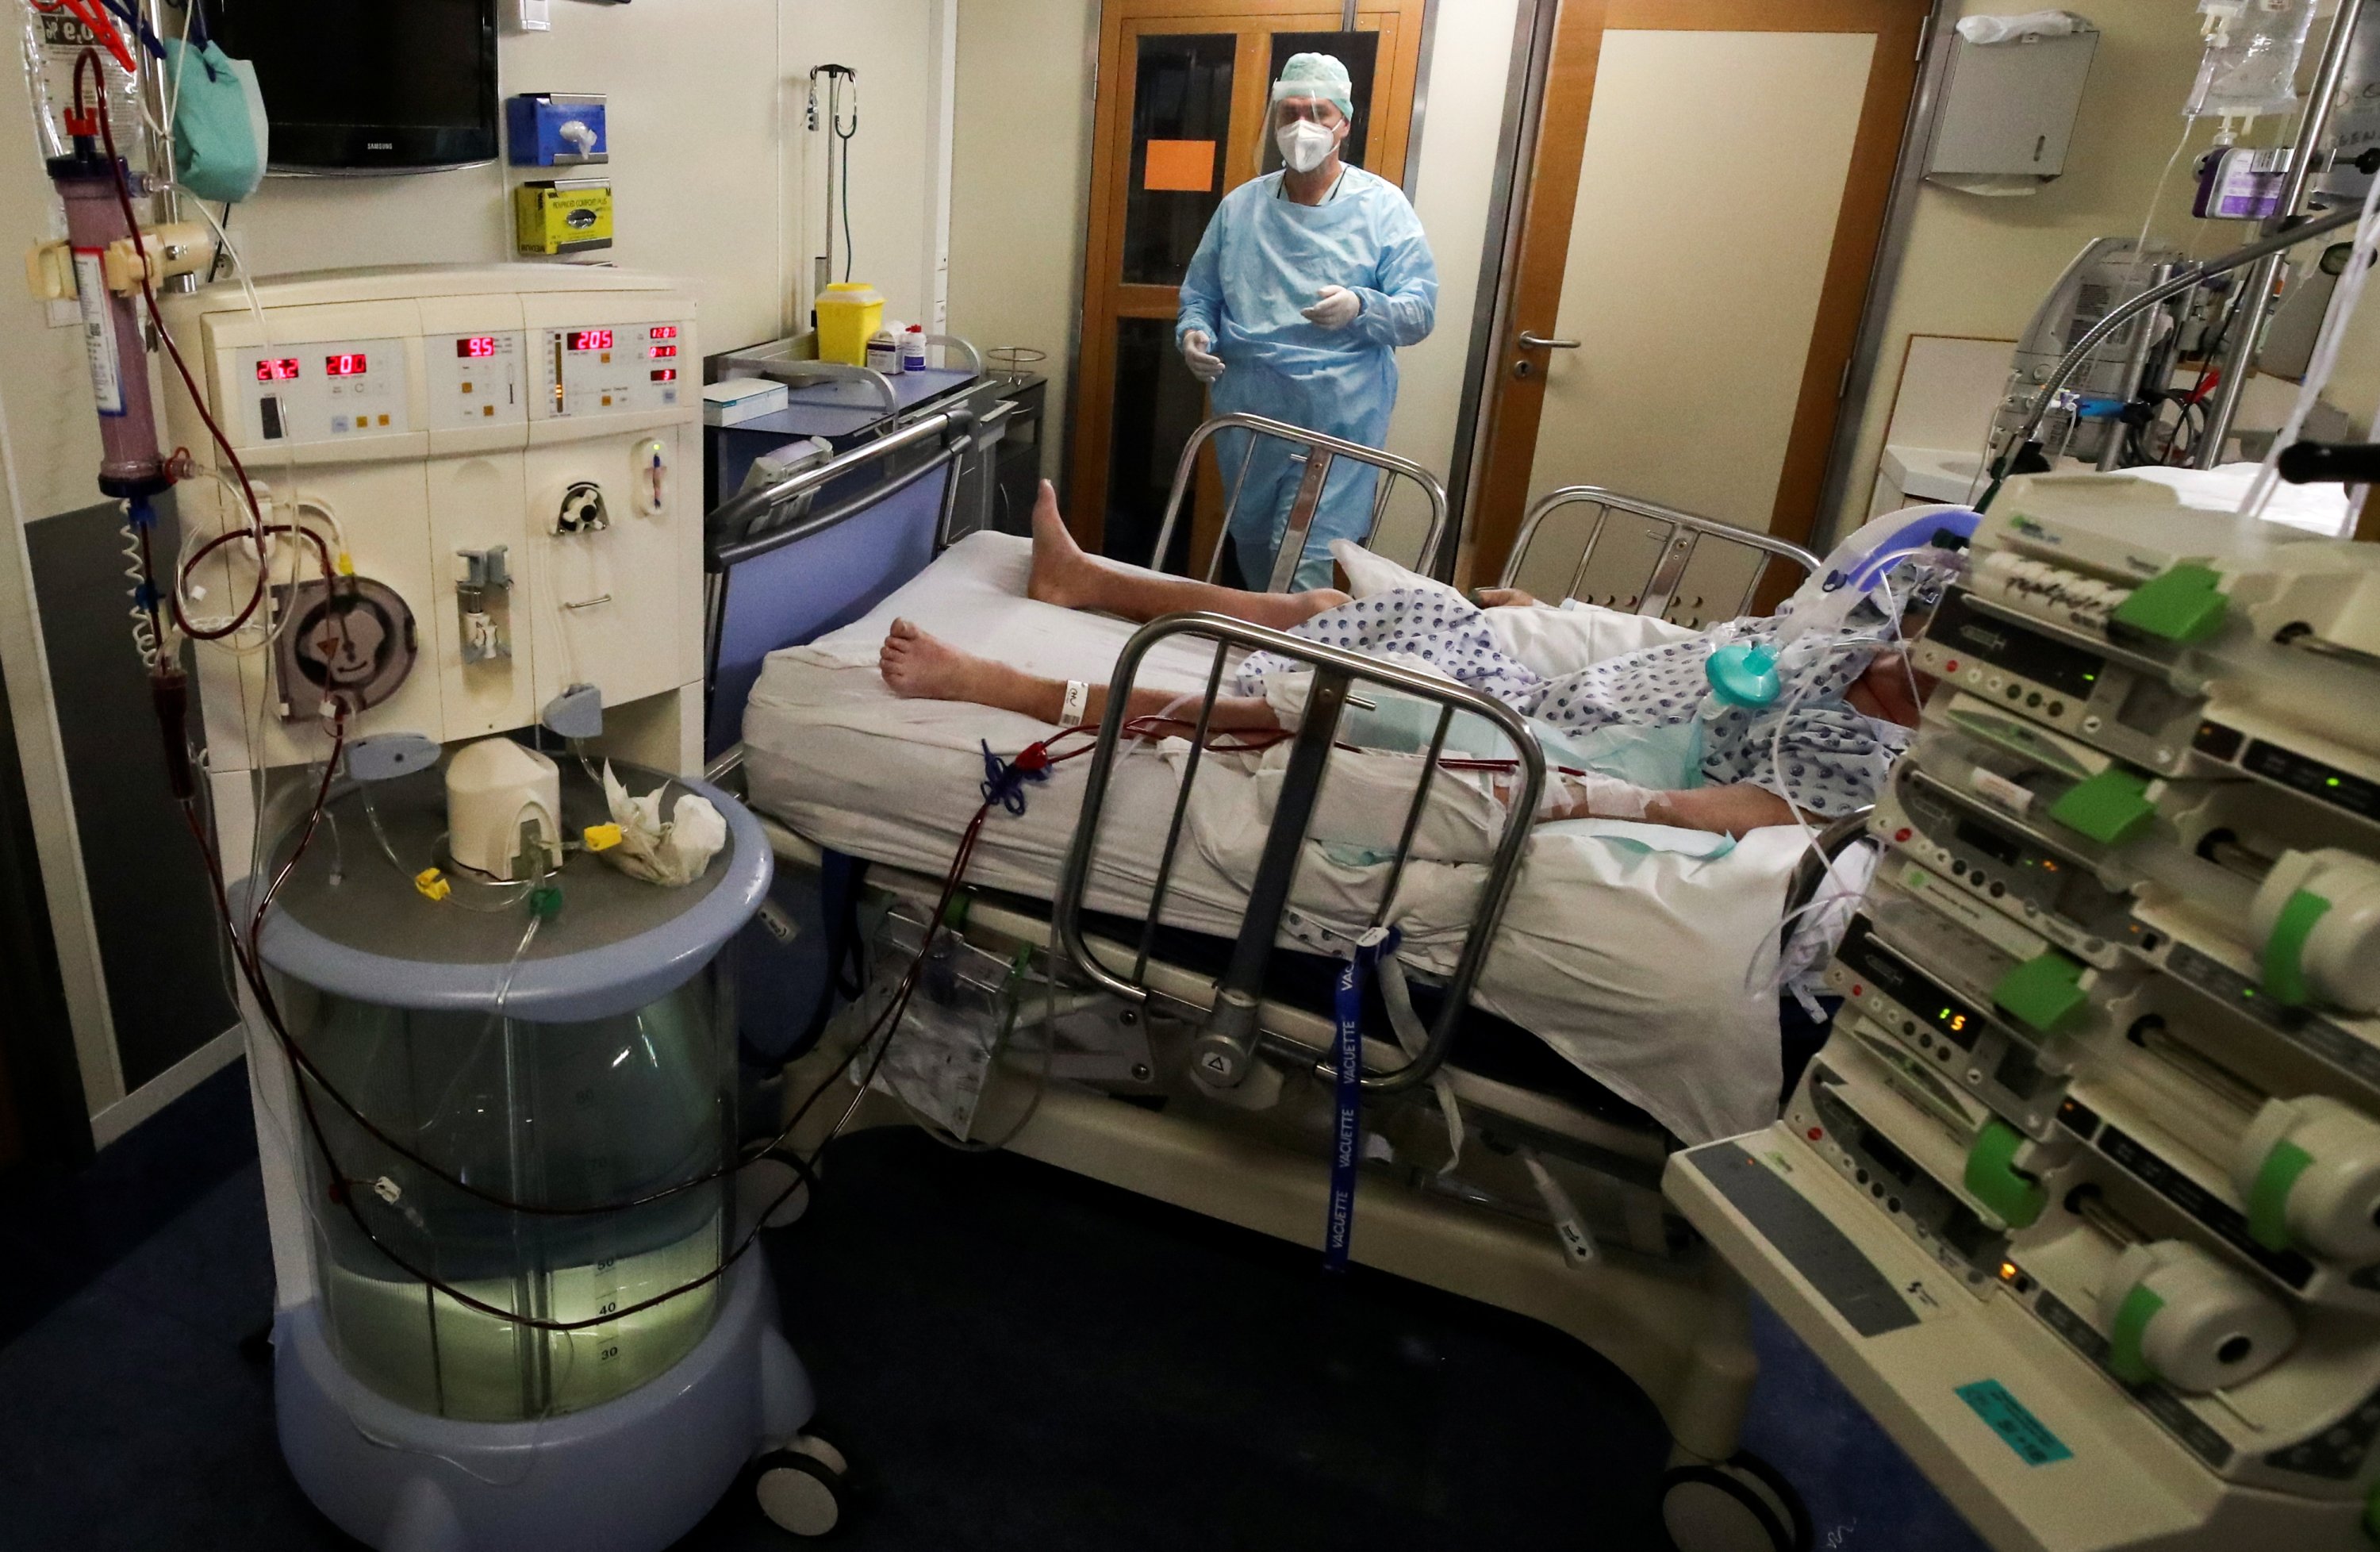 A member of the medical personnel at the CHU de Liege hospital stands next to a patient as they treat patients suffering from COVID-19 in Belgium, Oct. 27, 2020. (REUTERS Photo)